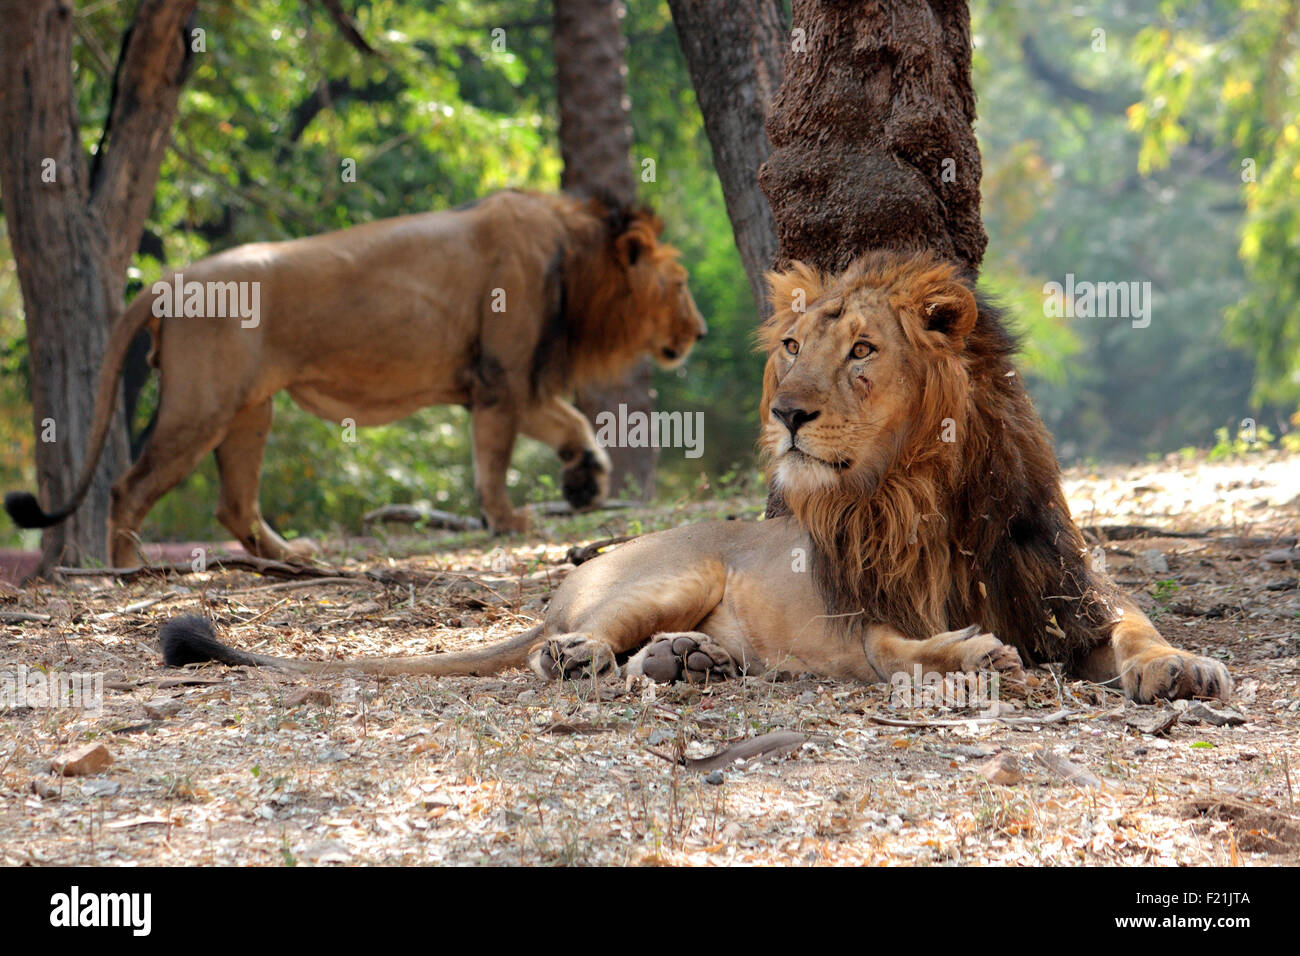 Indian Lion Gir forest Gujarat, India Foto Stock